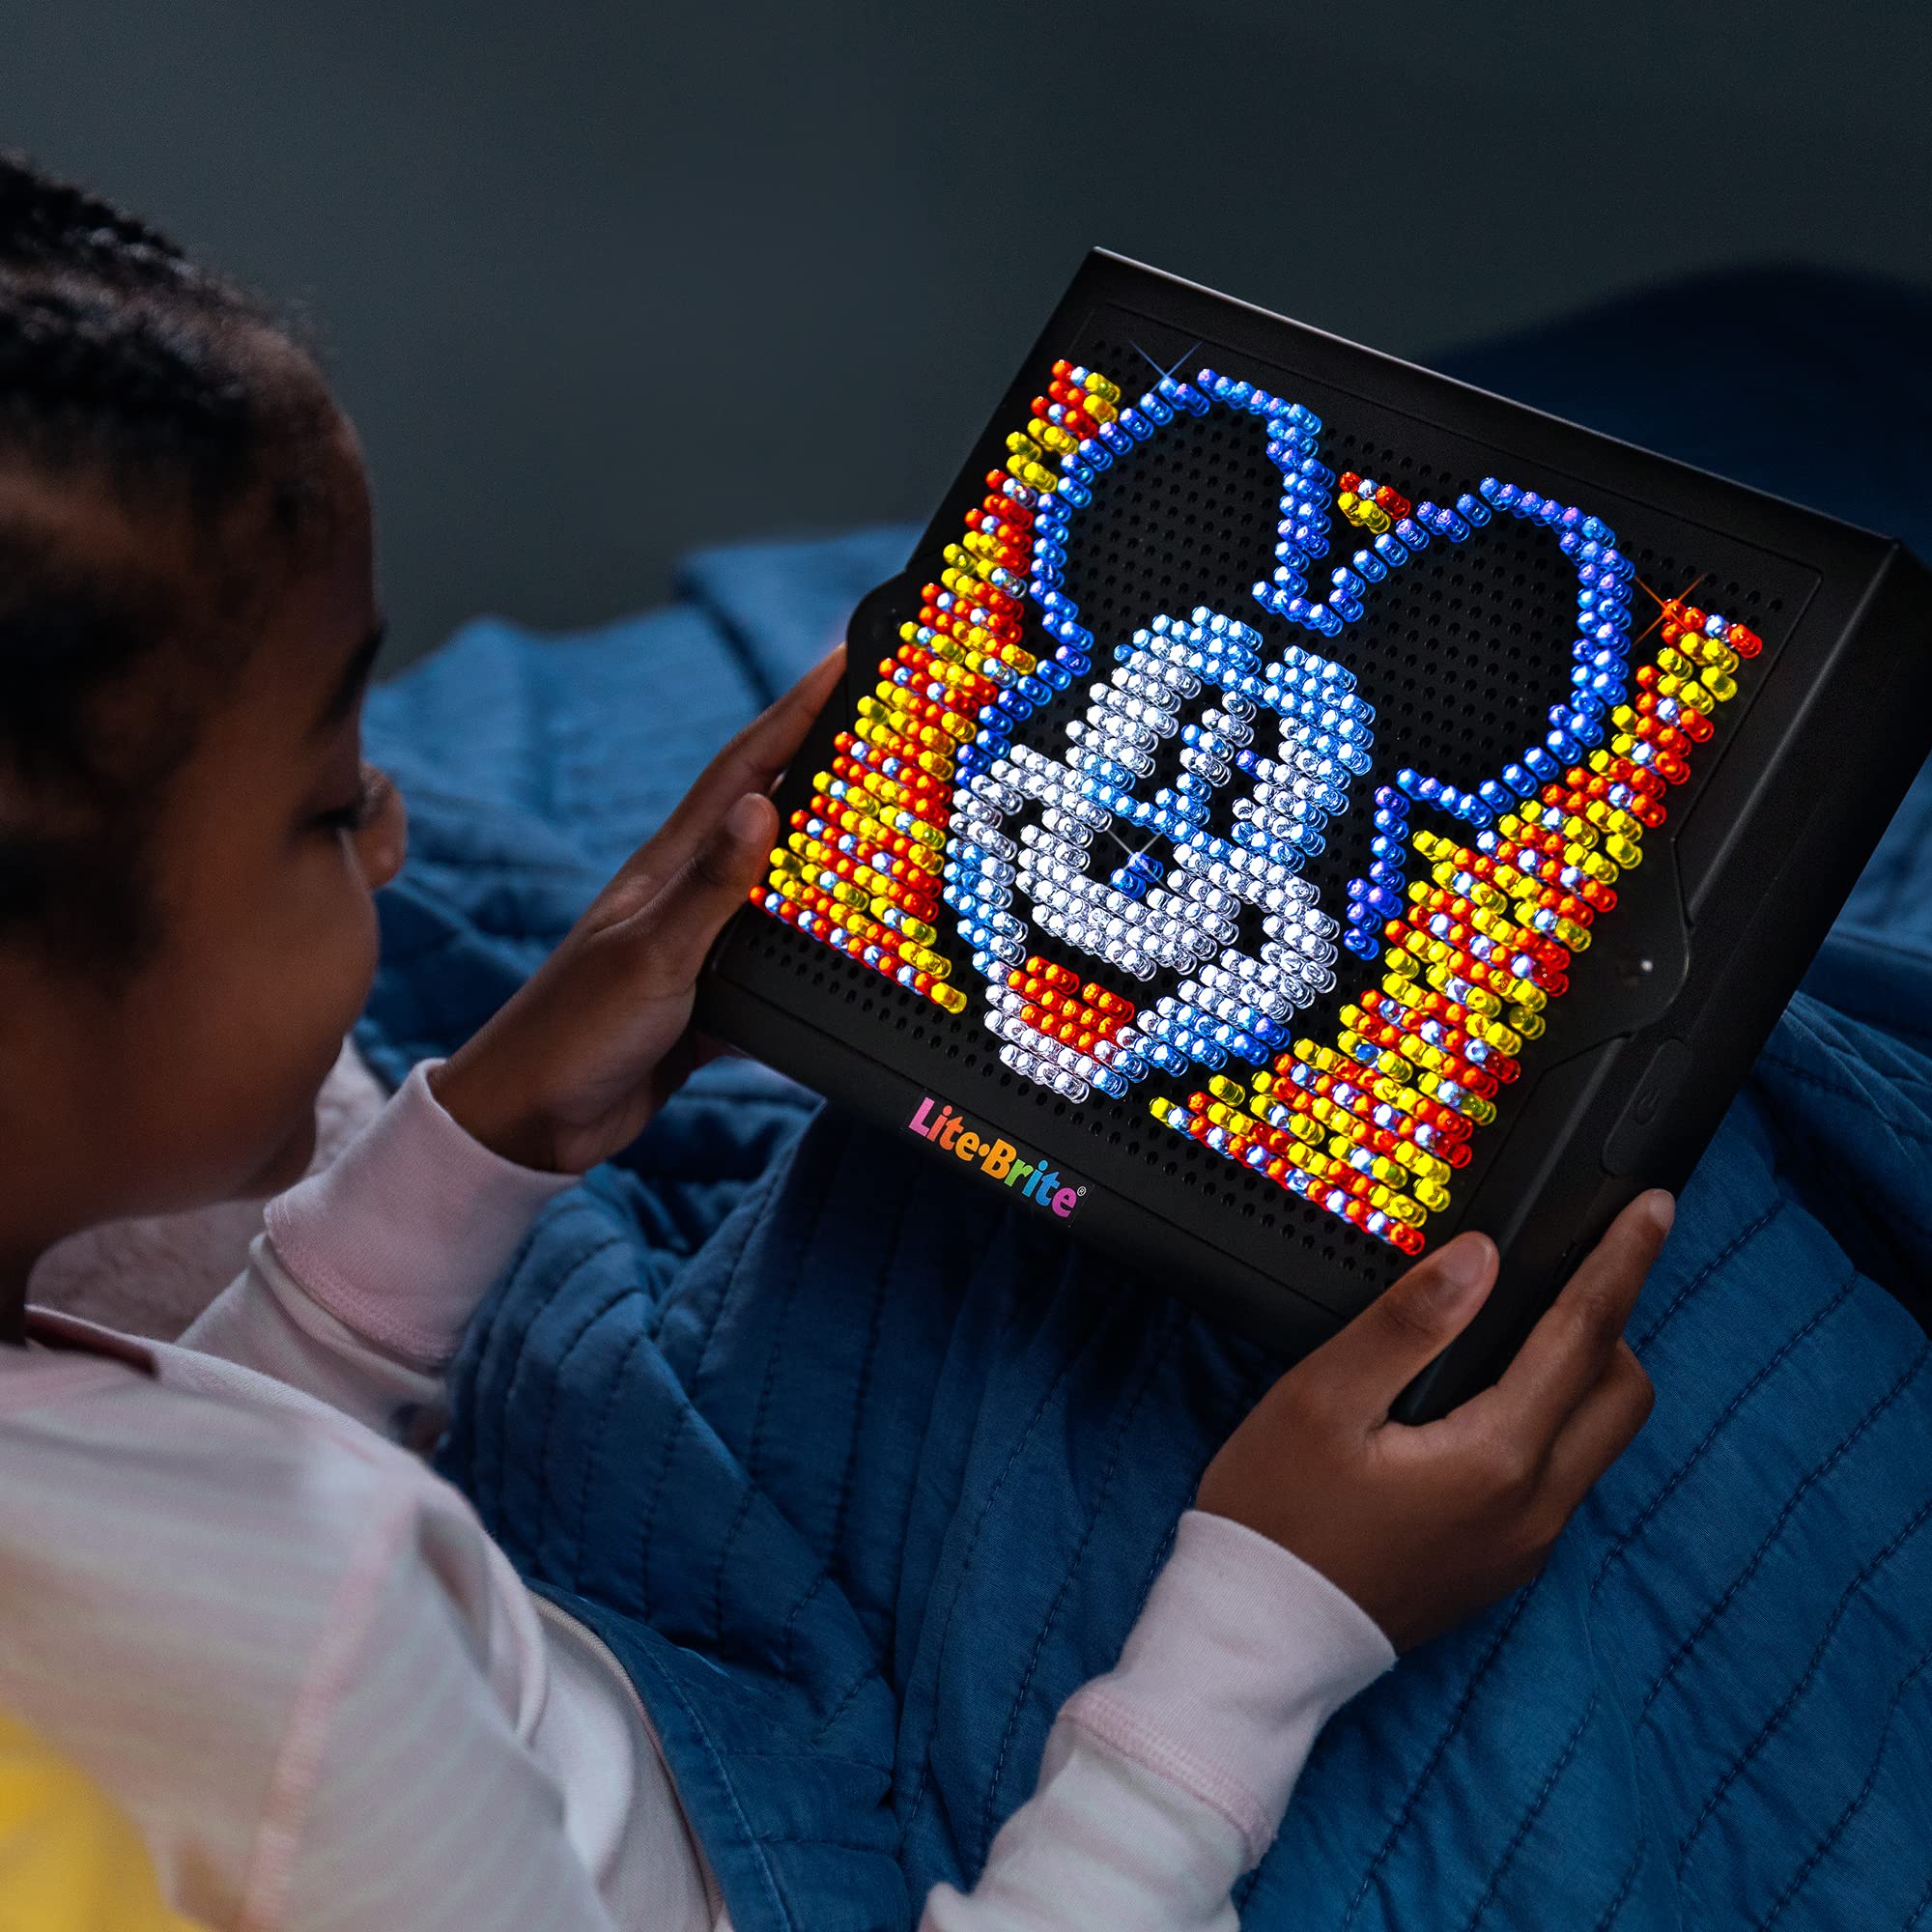 Lite Brite Disney Super Bright High Definition,100 Years of Wonder, Special Edition, Educational Learning Toy, Great Holiday, Christmas, Birthday Gift for Girls and Boys Ages 6,7,8,9,10+